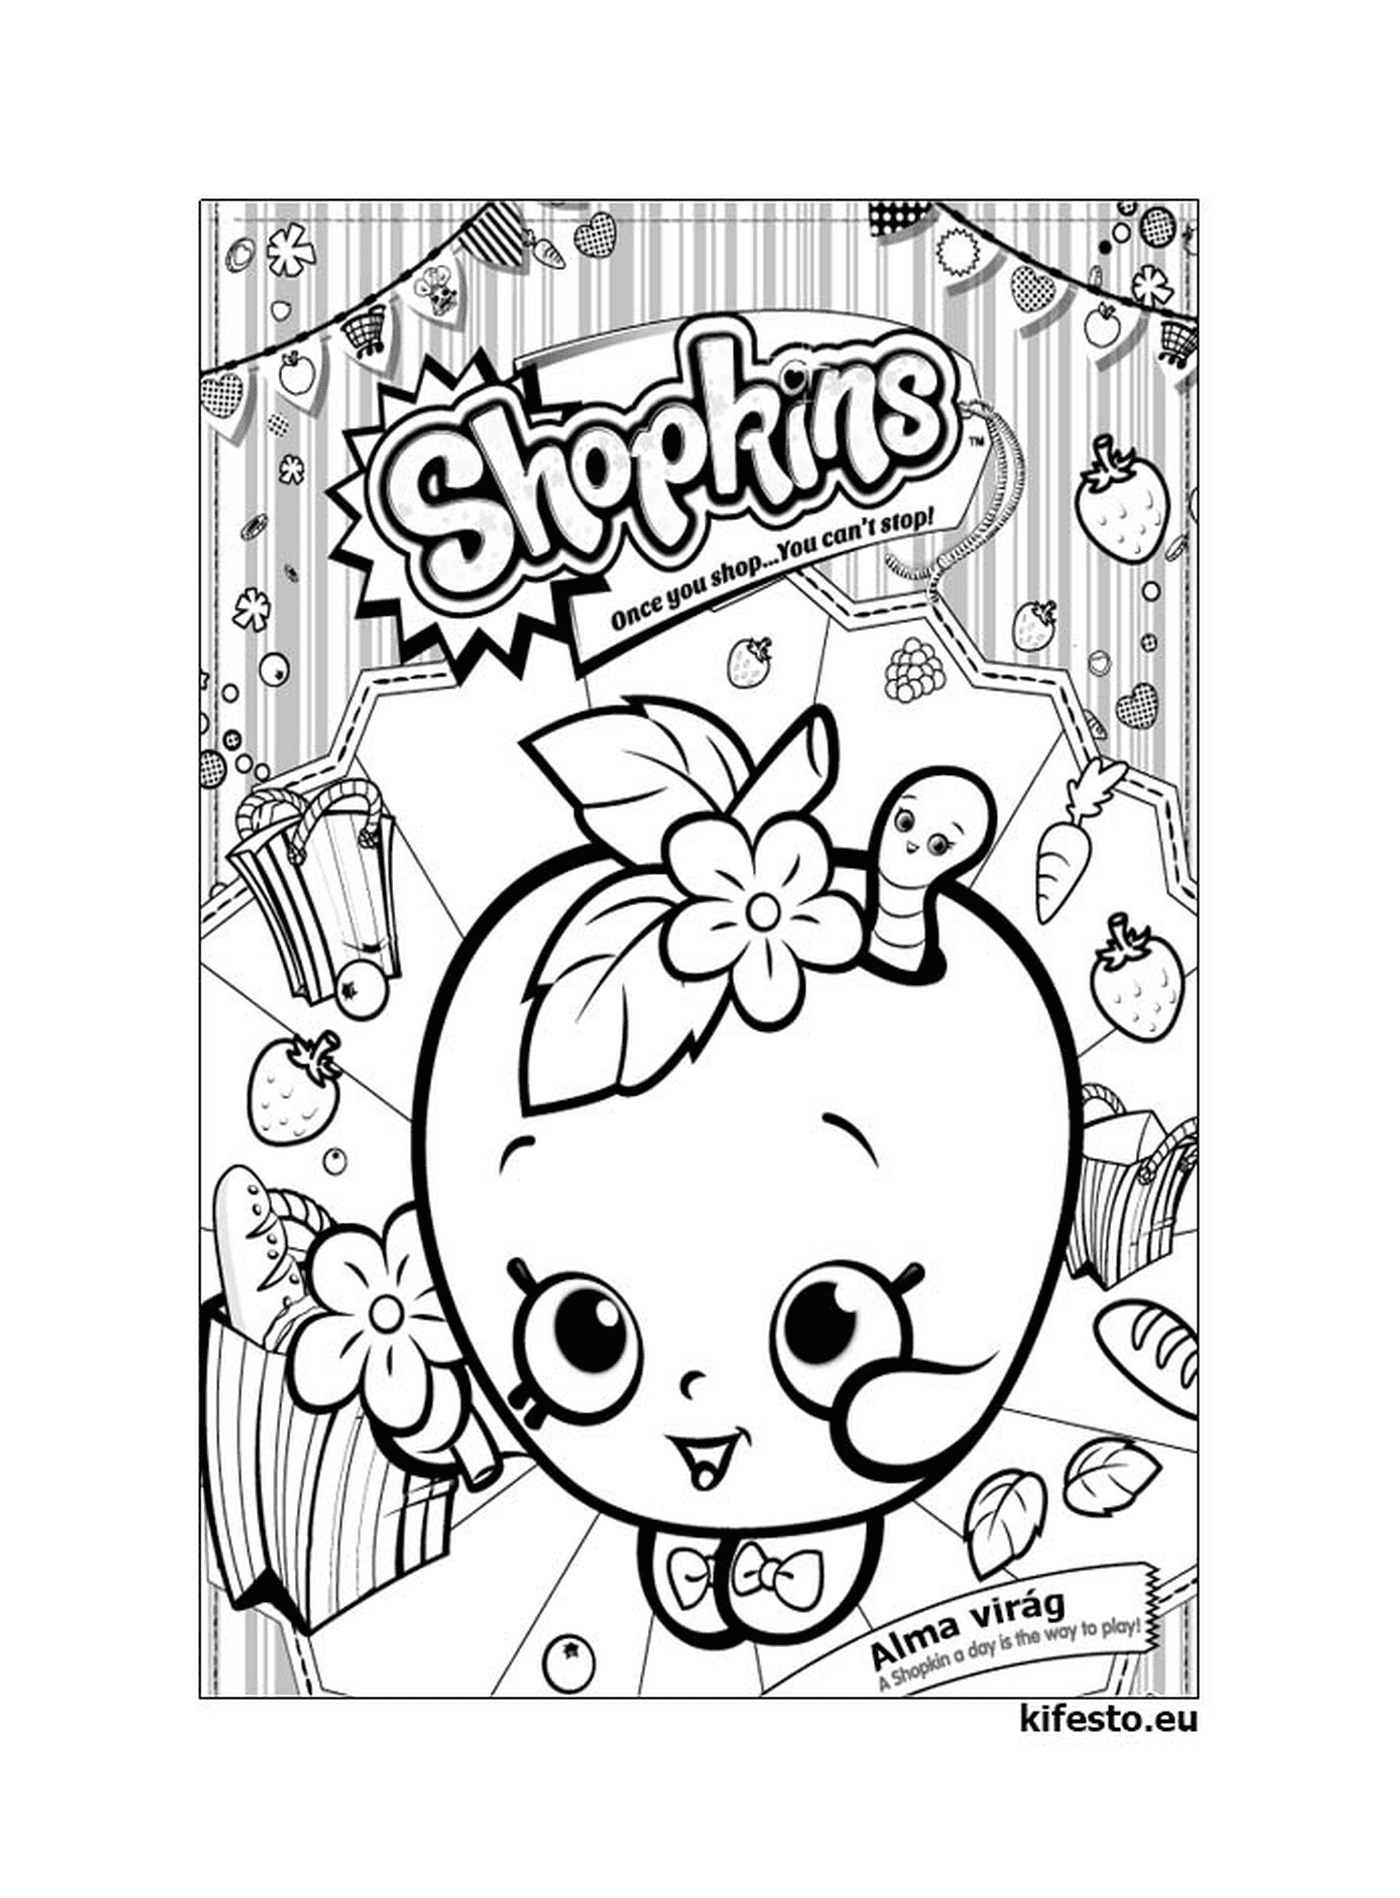  A colorful Shopkins character 